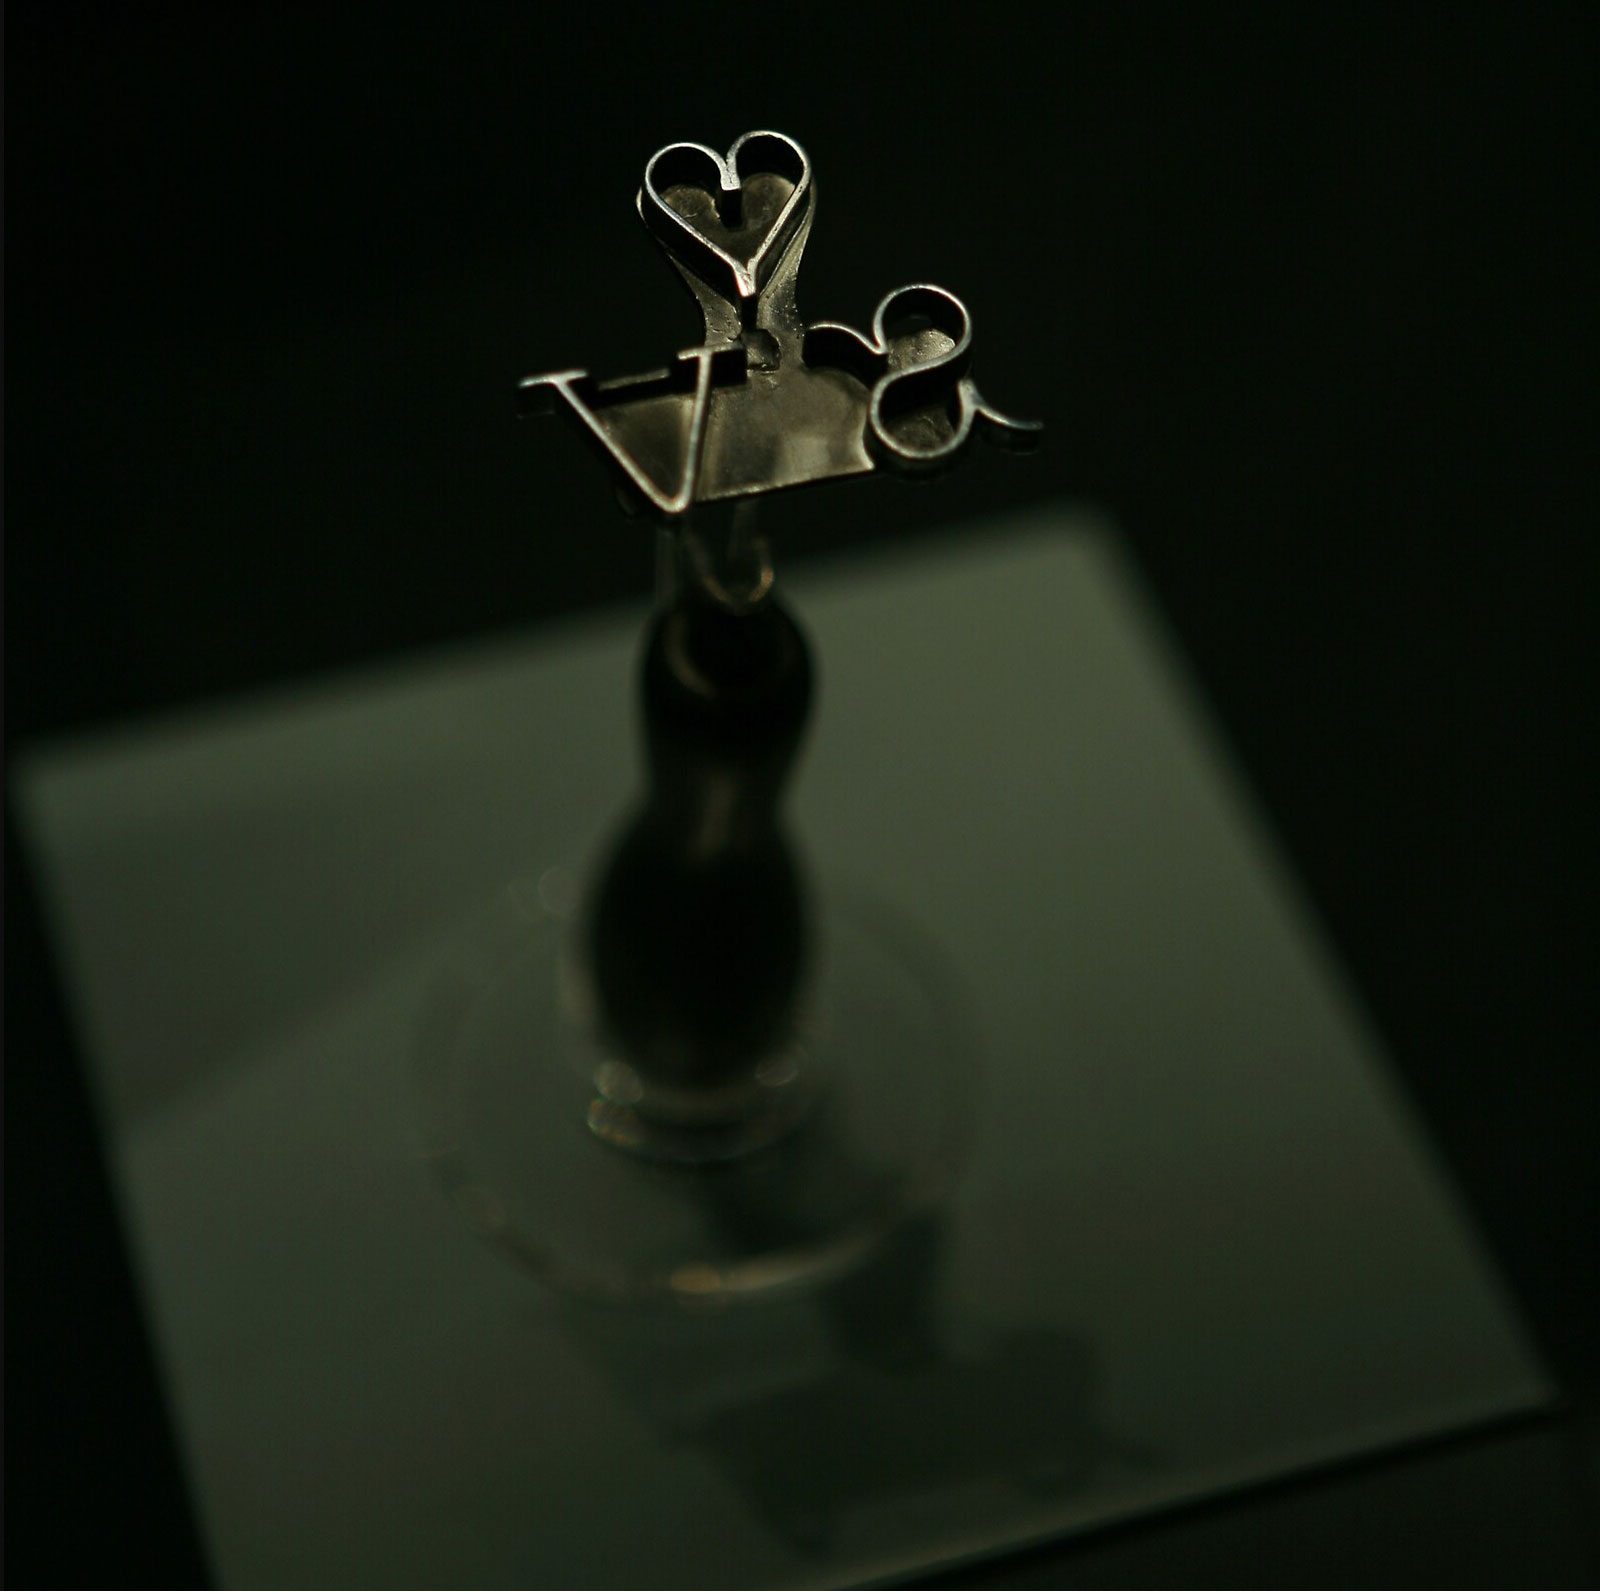 A replica branding iron on display at the International Slavery Museum in Liverpool, England.